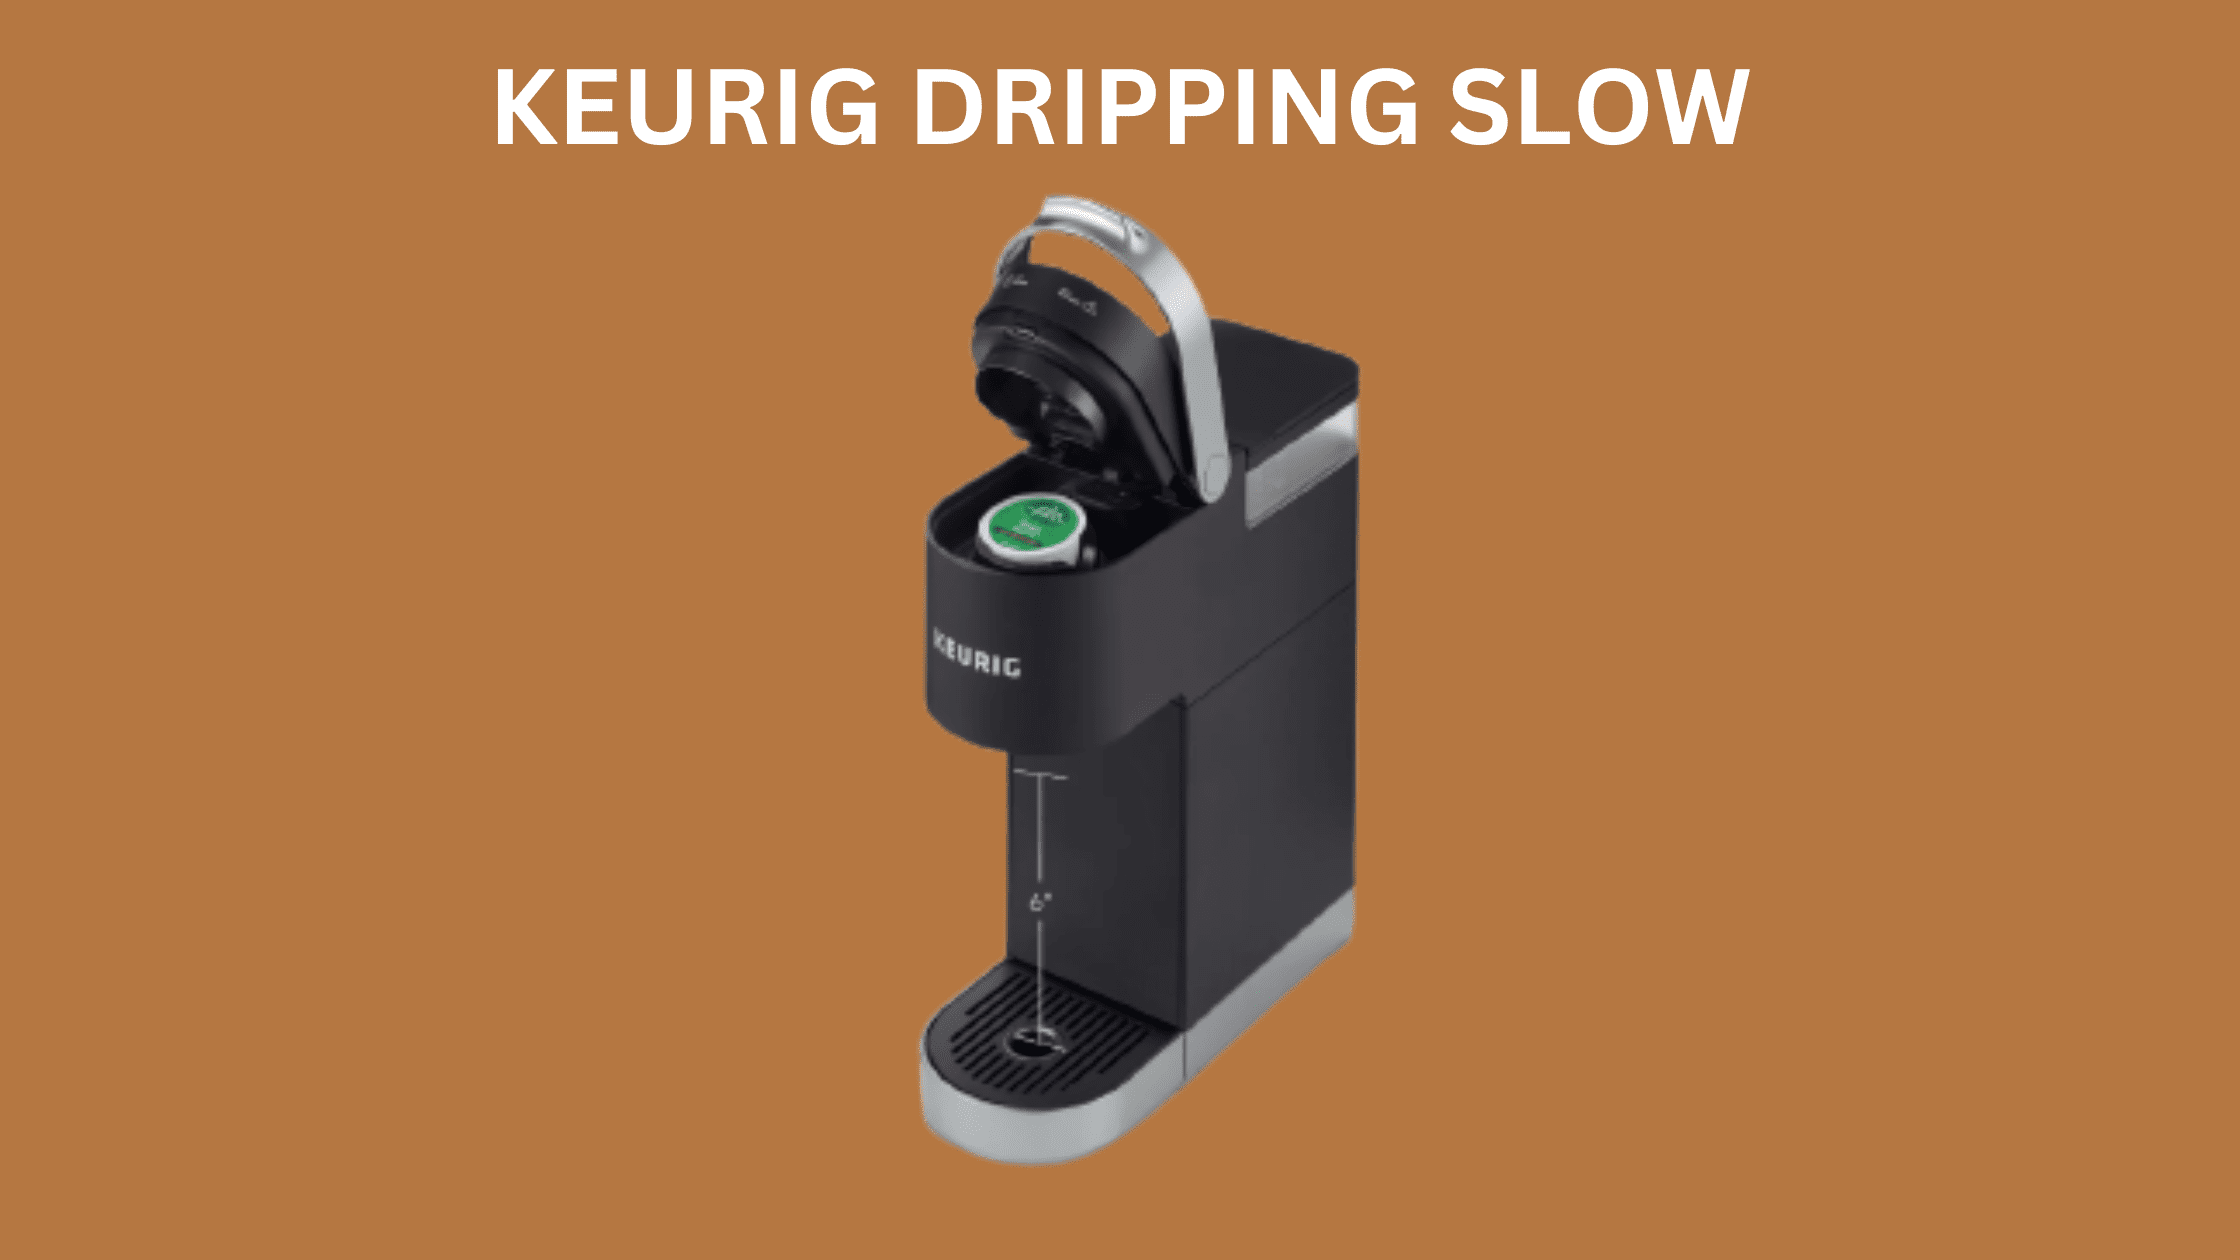 How To Fix A Keurig Dripping Slow